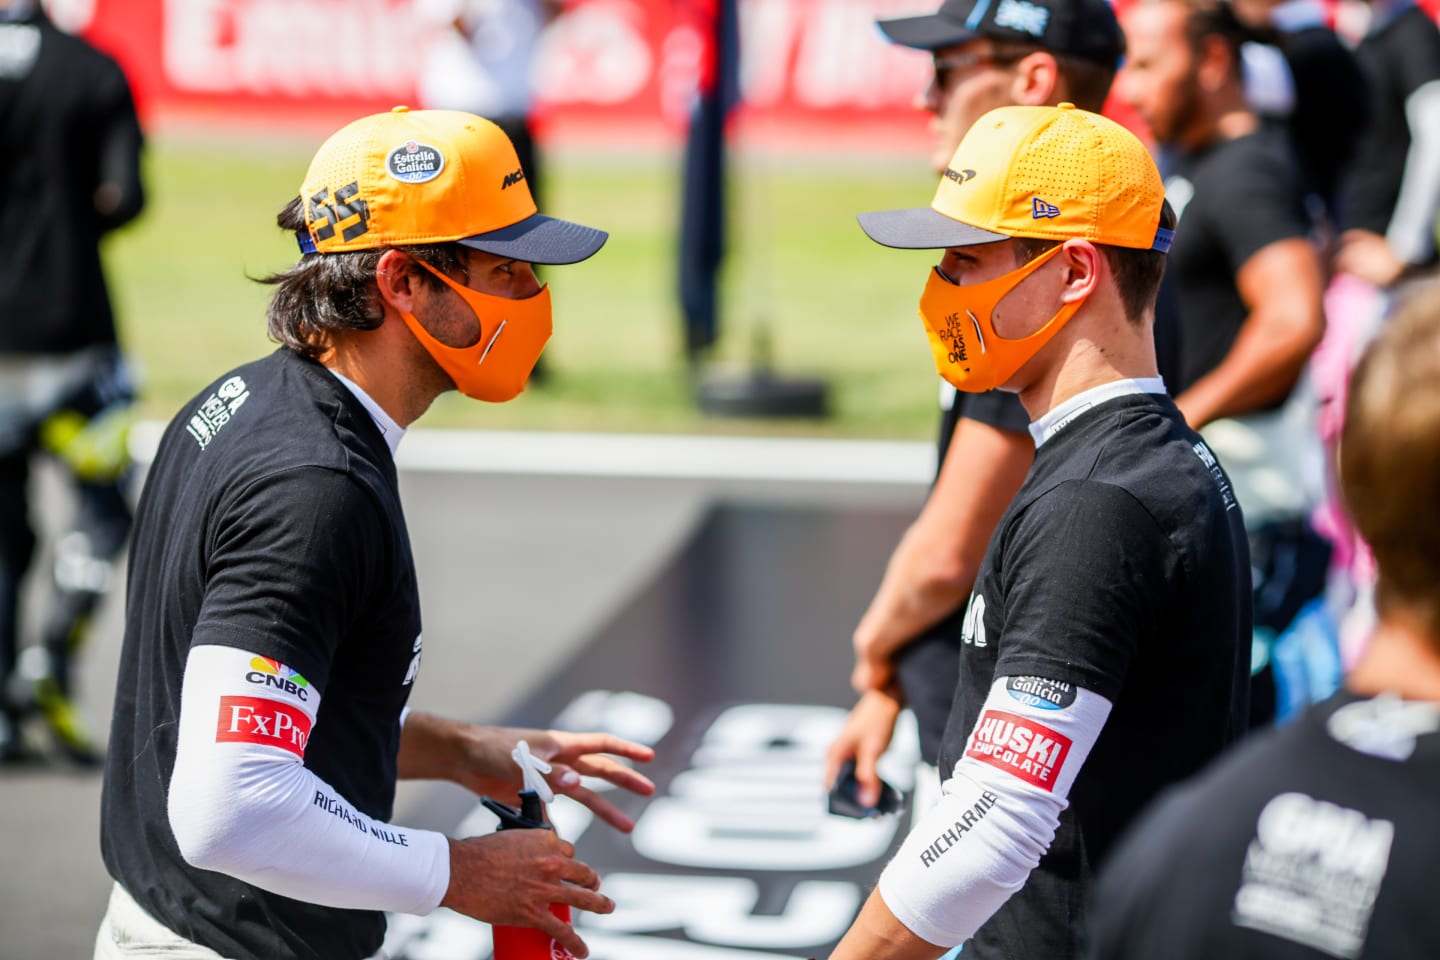 NORTHAMPTON, ENGLAND - AUGUST 09: Carlos Sainz of Scuderia Renault and Spain with Lando Norris of McLaren and Great Britain during the F1 70th Anniversary Grand Prix at Silverstone on August 09, 2020 in Northampton, England. (Photo by Peter Fox/Getty Images)